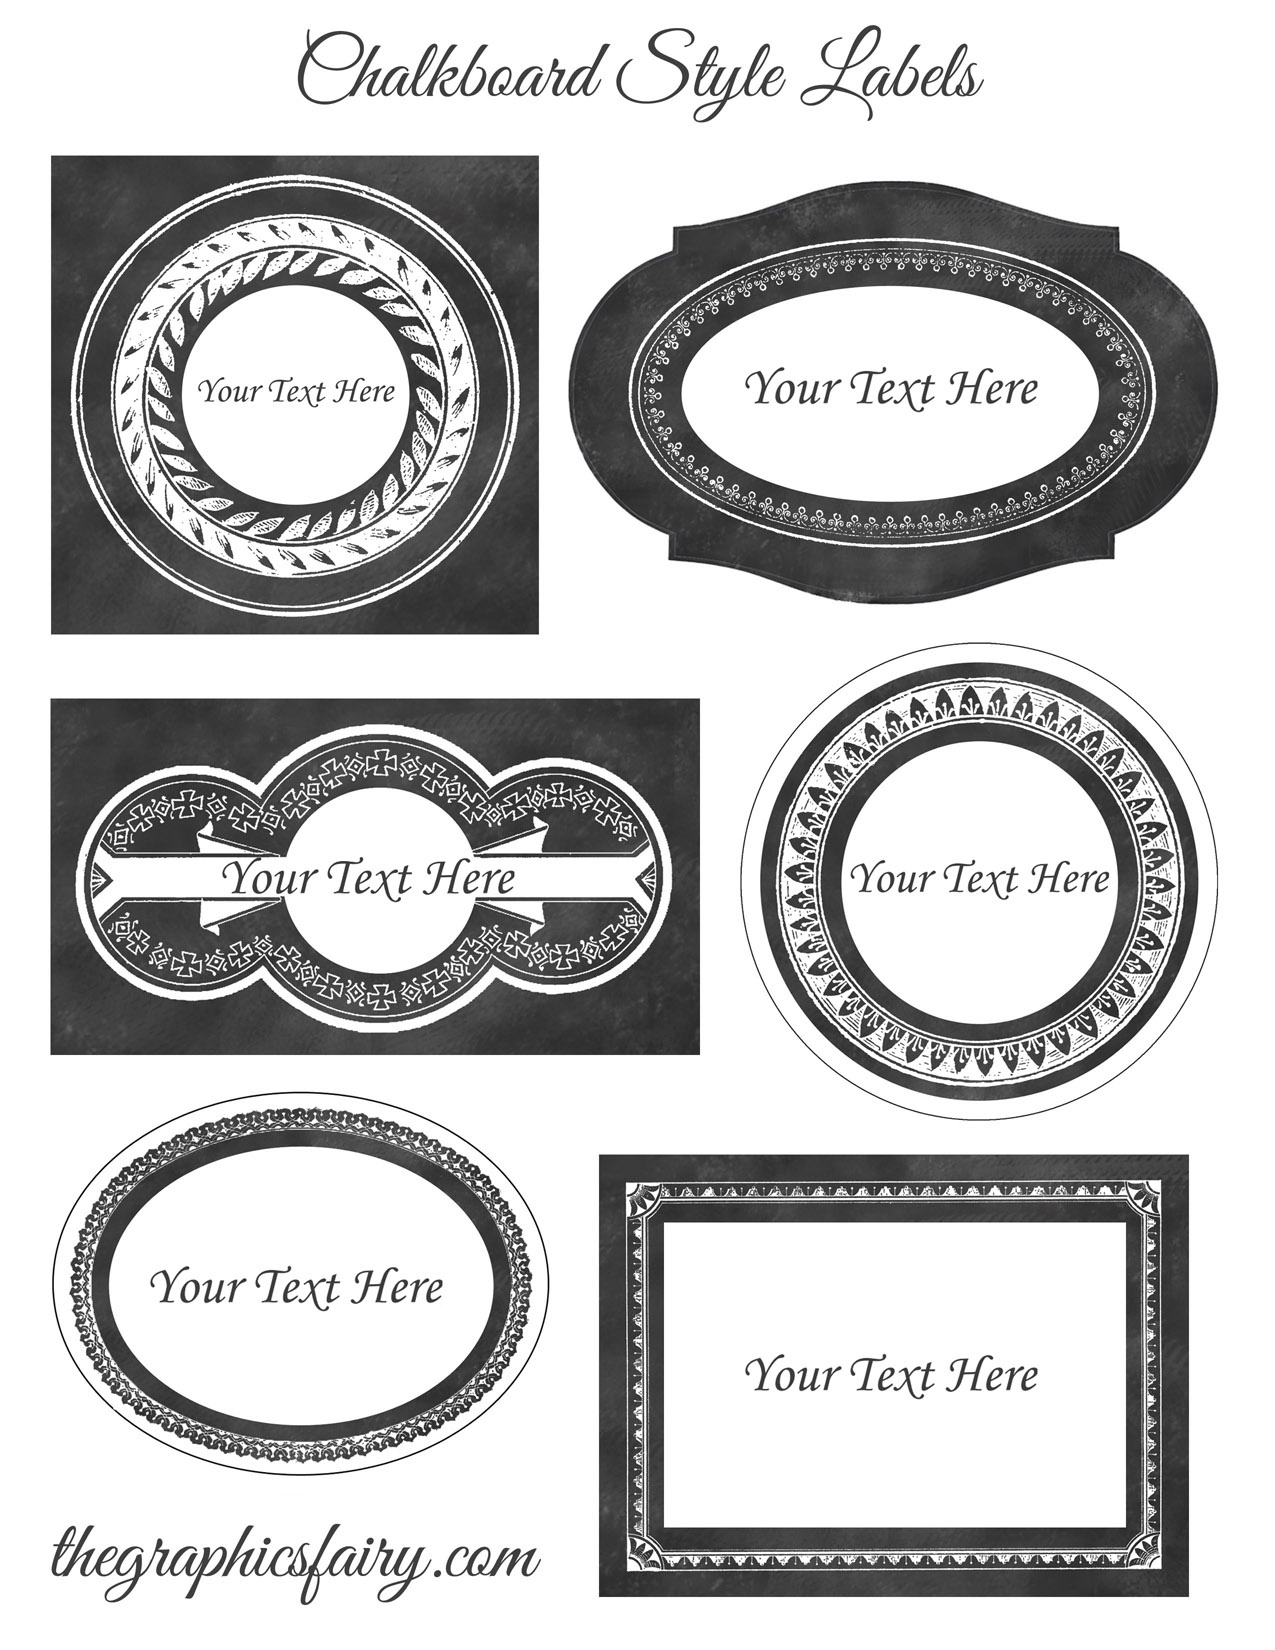 Chalkboard Style Printable Labels - Editable! - The Graphics Fairy - Free Customizable Printable Labels